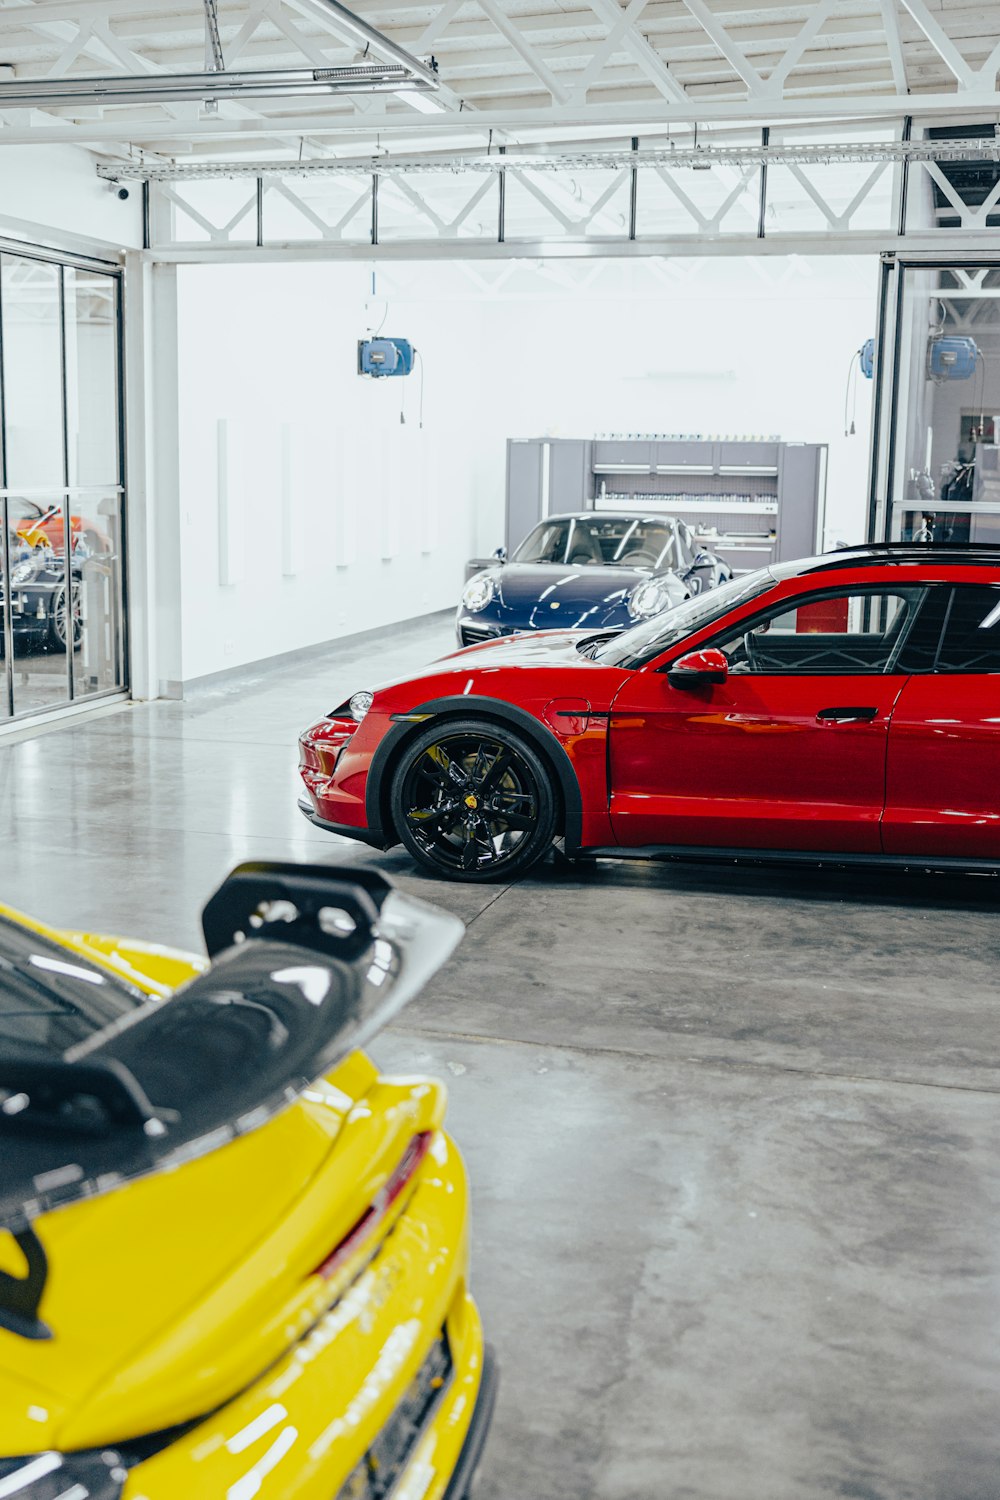 two red sports cars parked in a garage